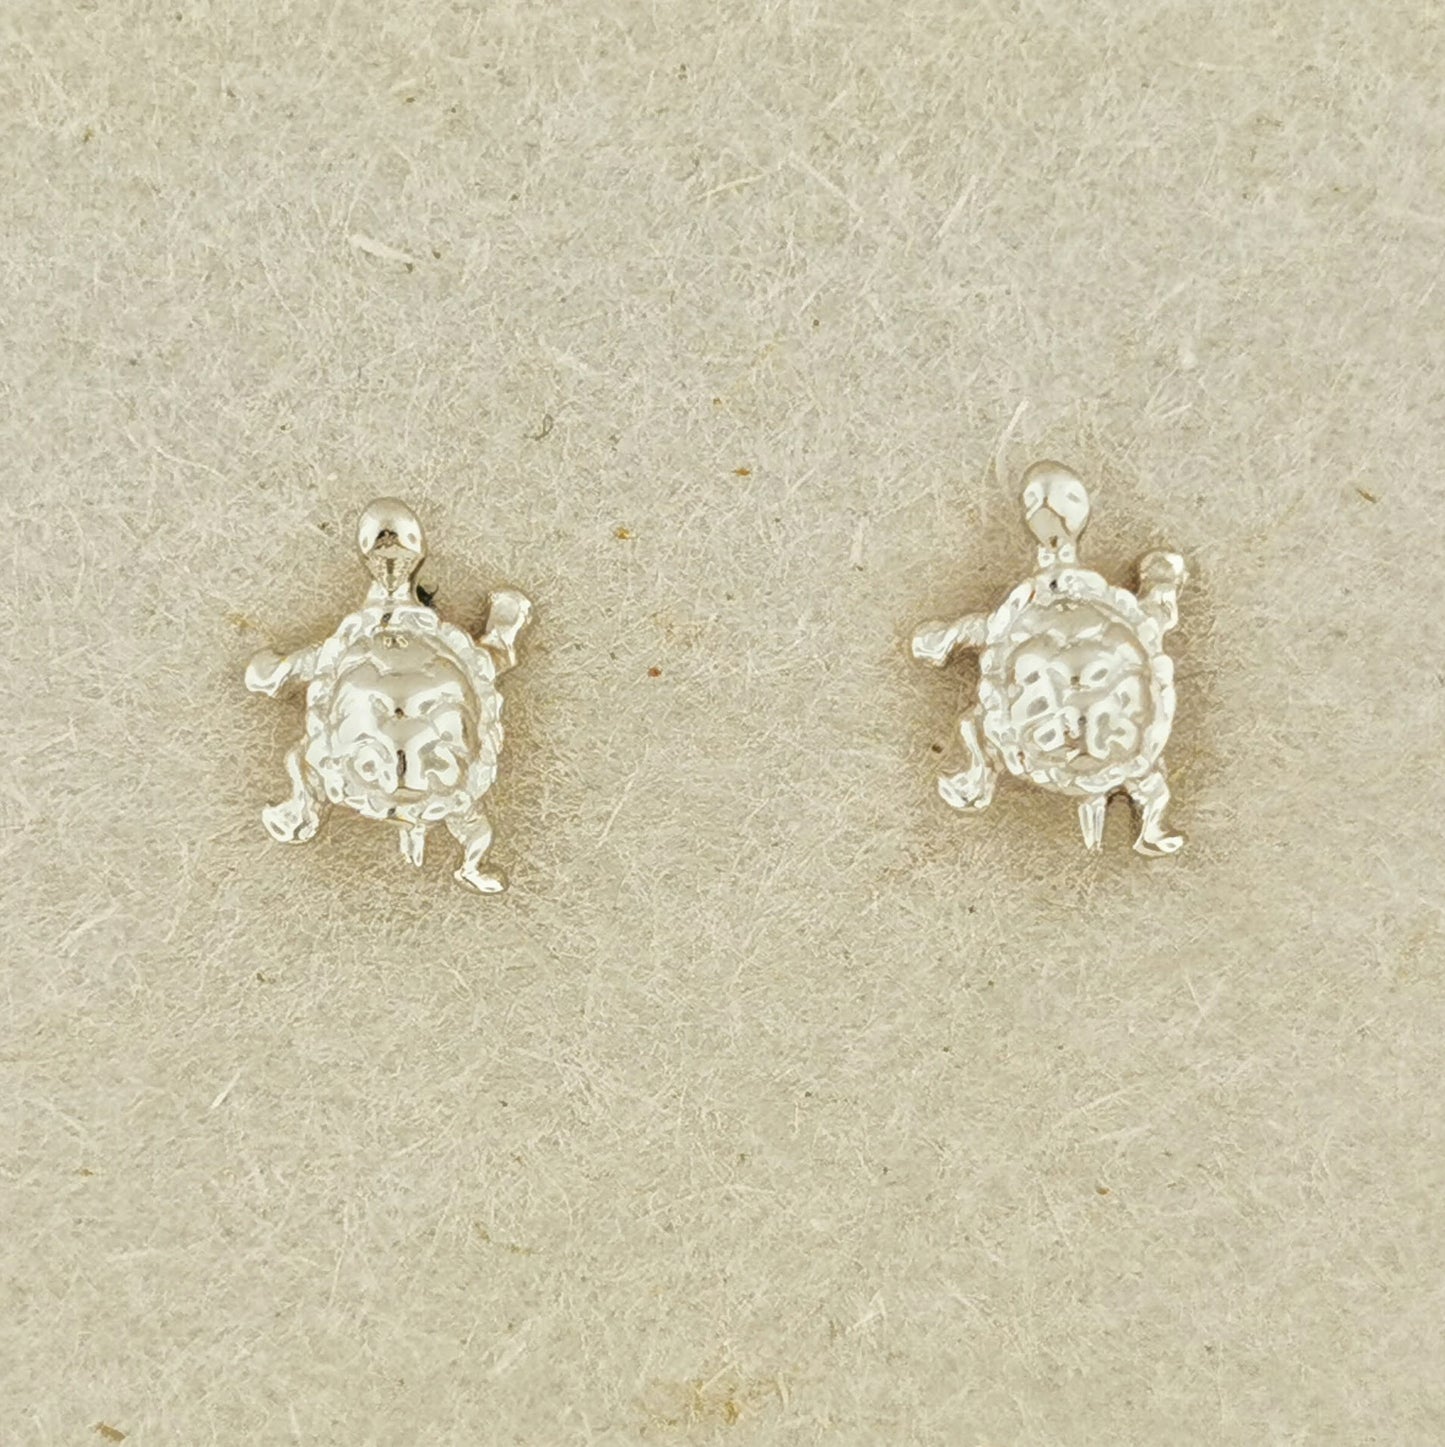 Gold Turtle Earrings Made To Order, Gold Turtle Earrings, Gold Turtle Jewelry, Gold Turtle Jewellery, Turtle Stud Earrings, Small Turtule Earrings in Gold, Turtle Lover Earrings, Turtle Lover Studs, Turtle Lovers Jewelry, Turtle Lover Jewellery